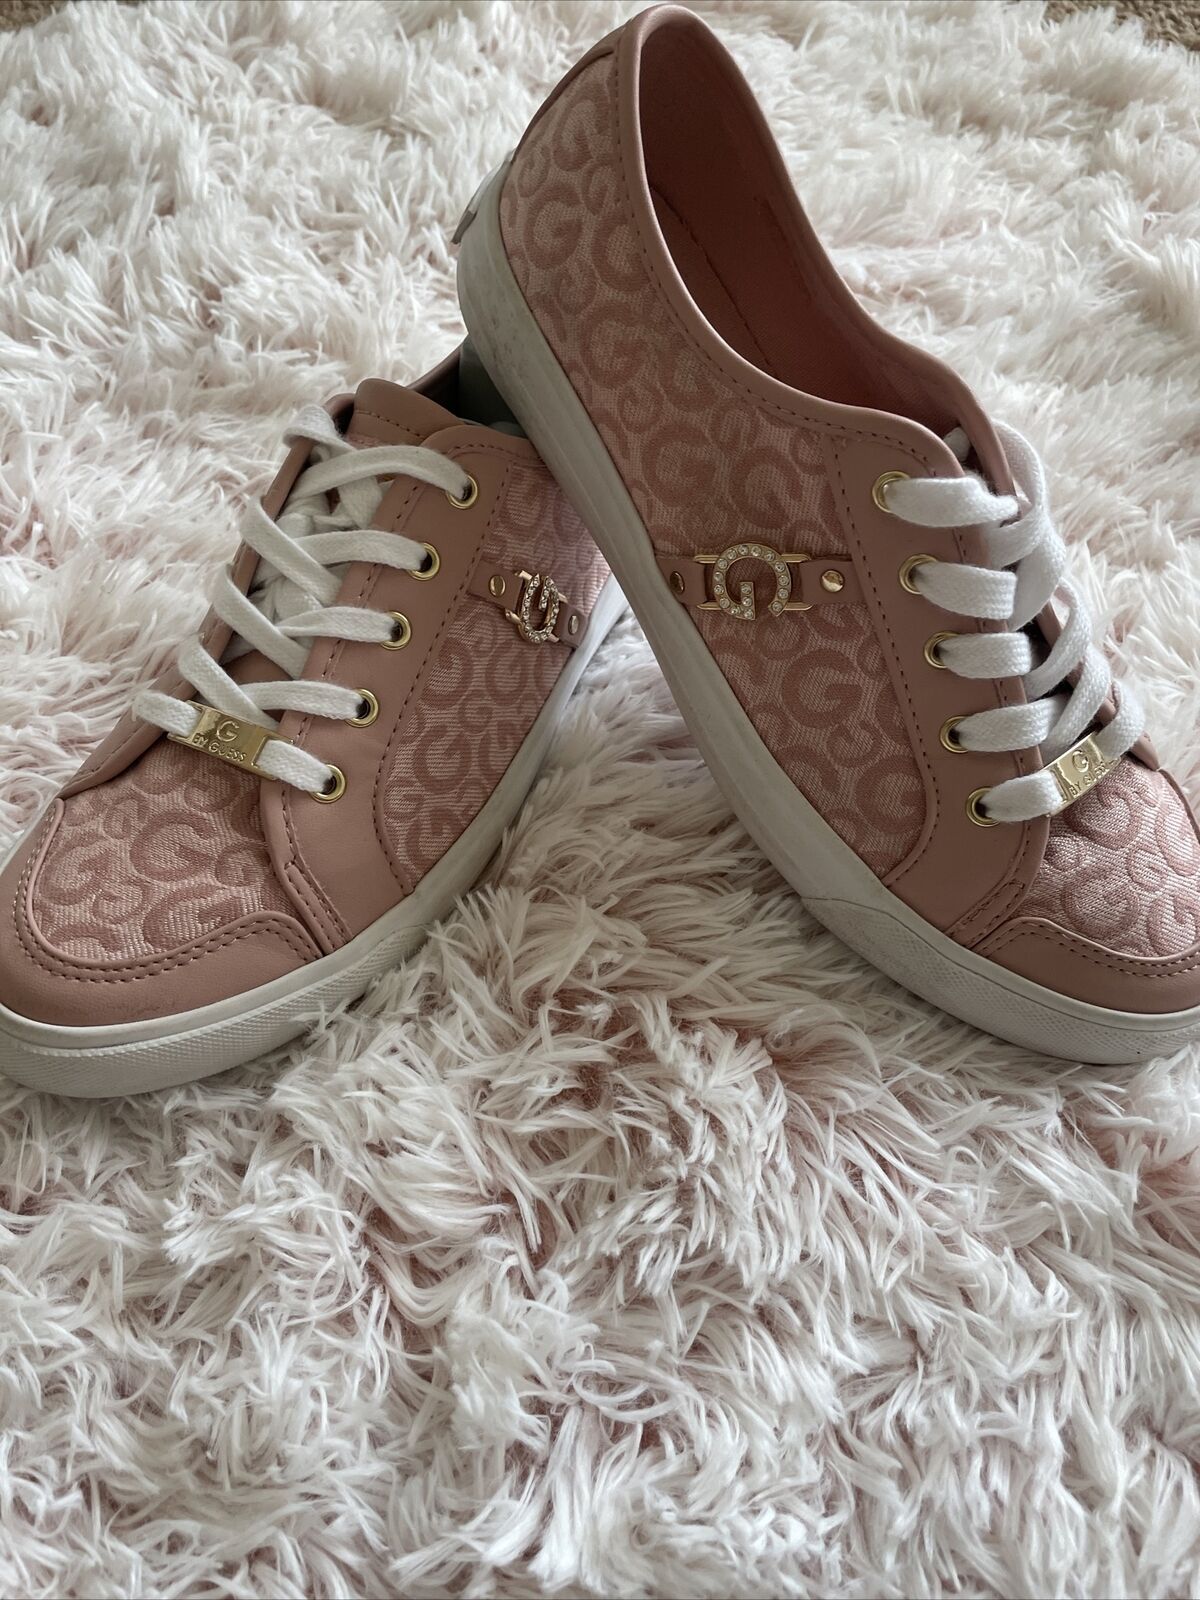 G By Guess Baylee2 Casual Pink Shoes For Women Size 8.2/1M